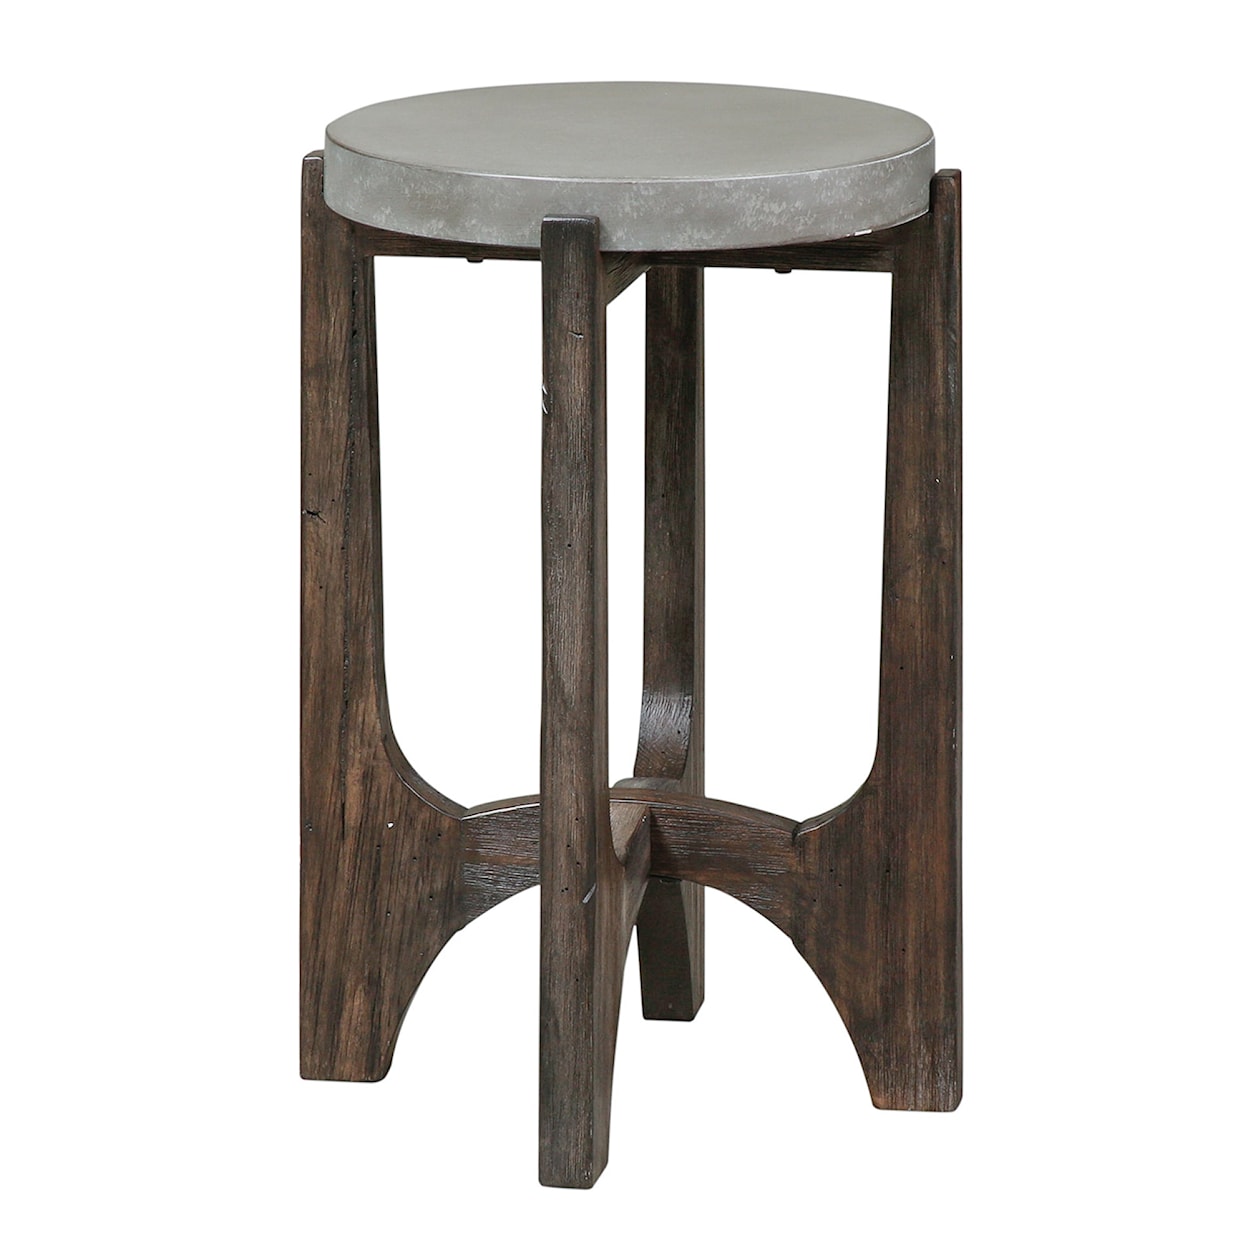 Libby Cato Chairside Table